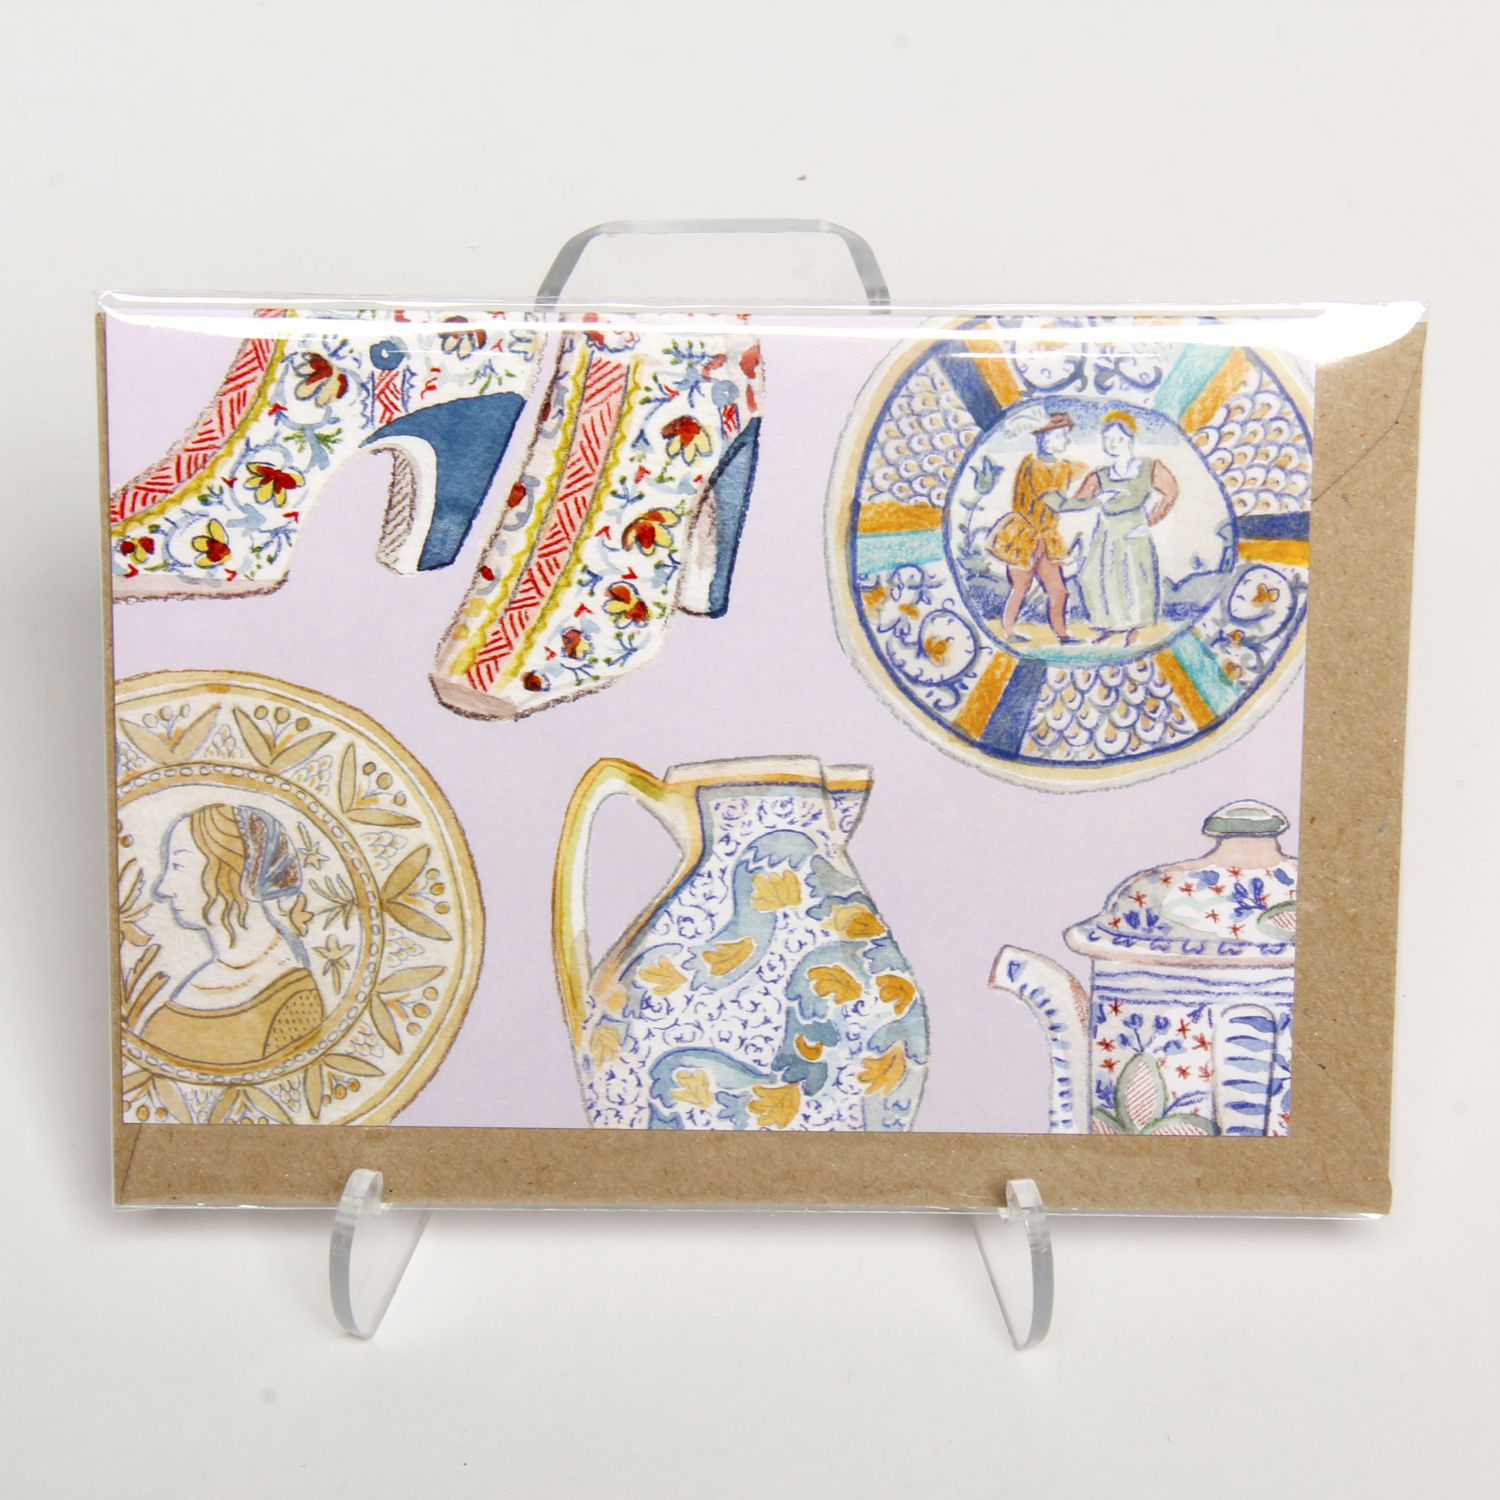 Natalie Czerwinski: Exclusive Card, Collection of Earthenware Product Image 1 of 1